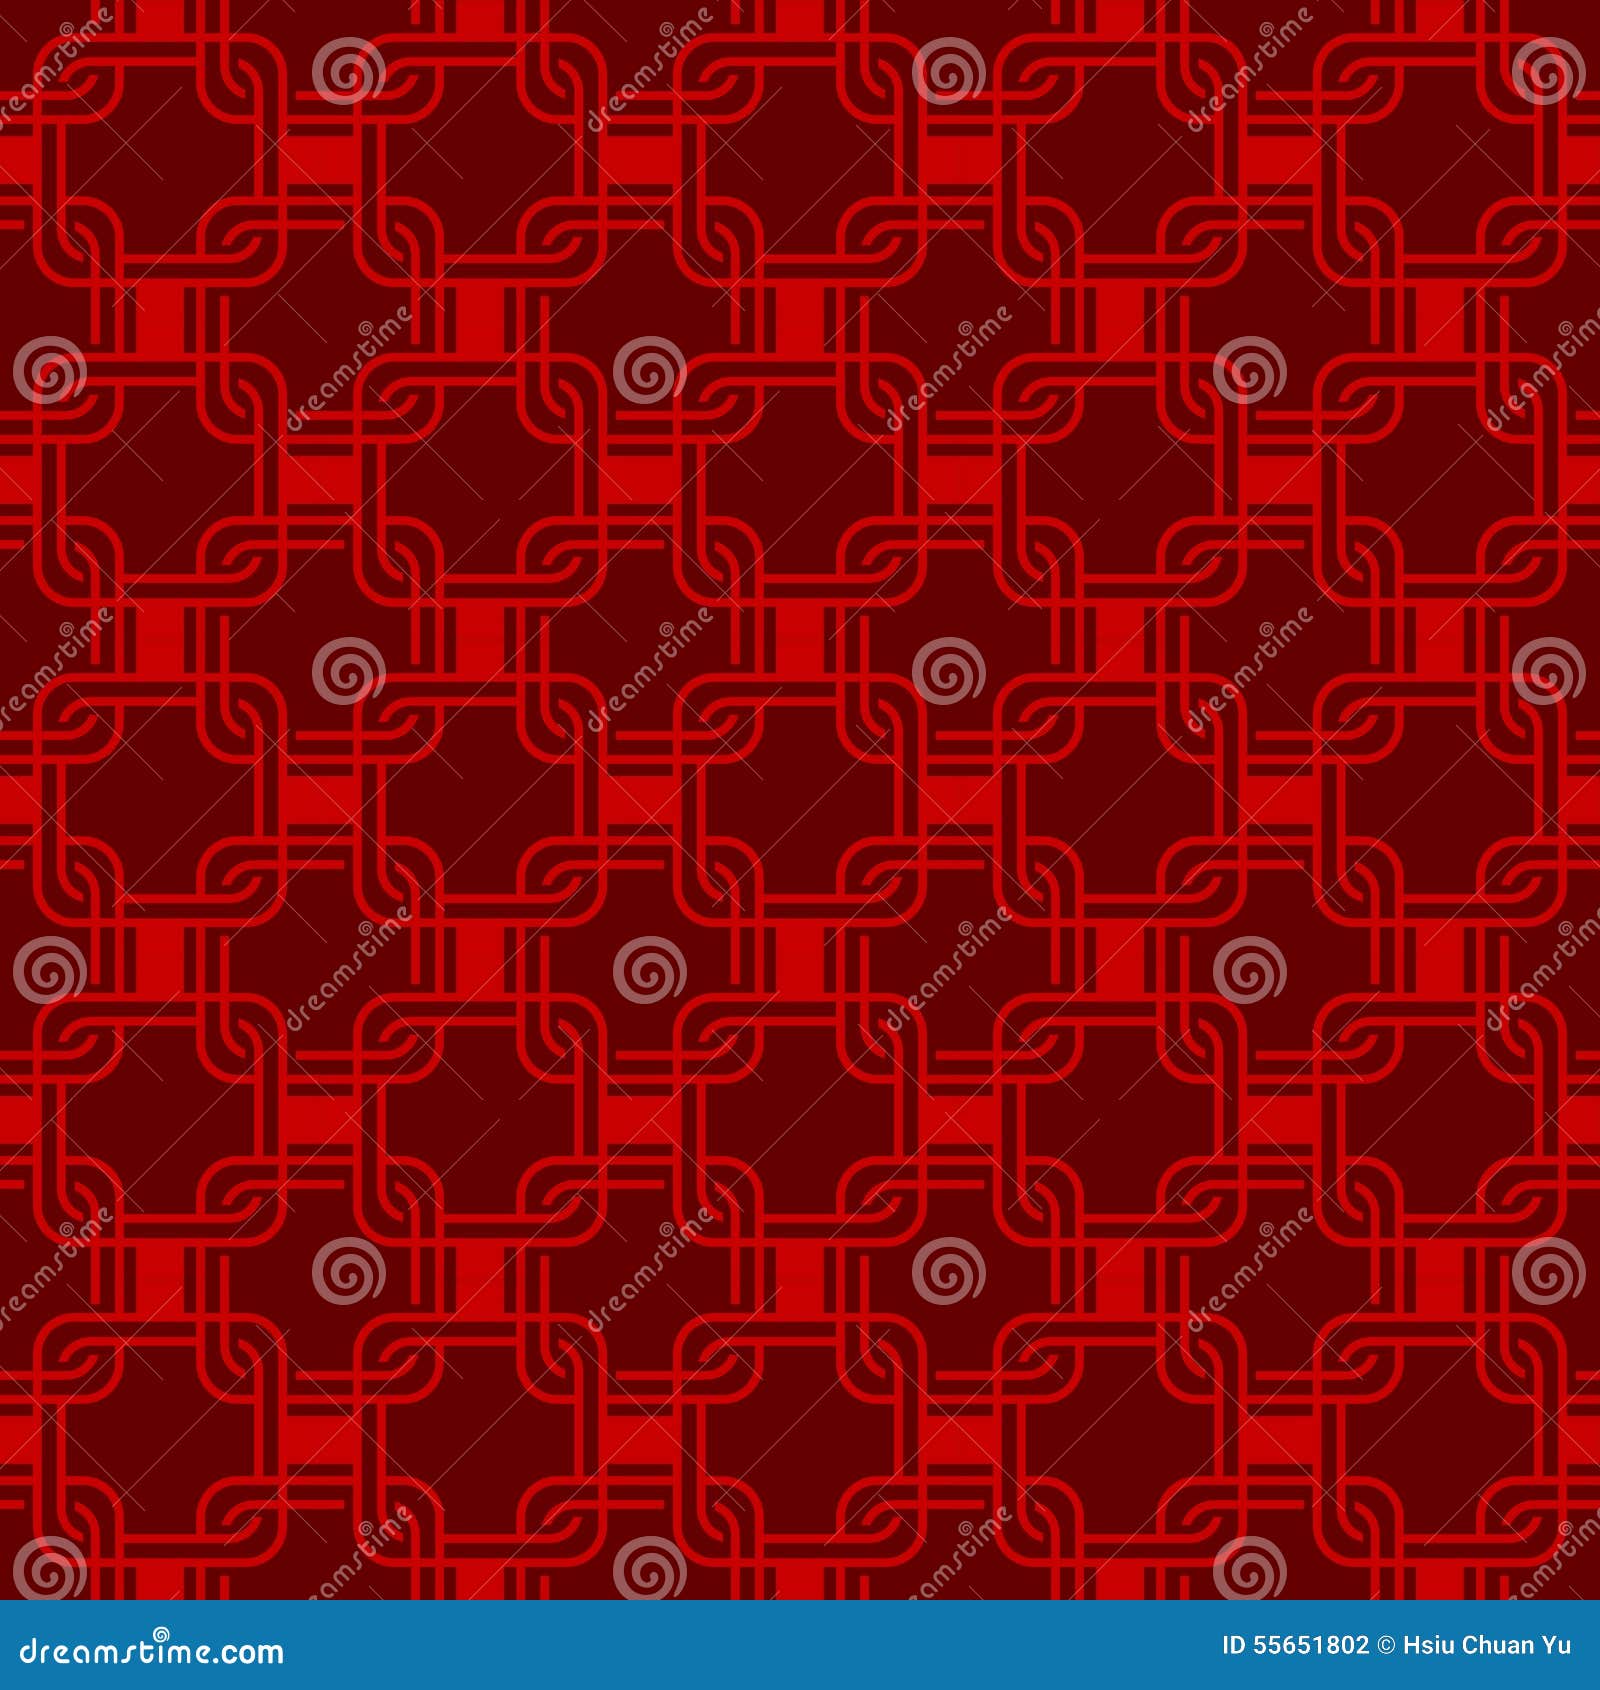 Seamless Red Chinese Style Arranged in a Crisscross Square Pattern ...